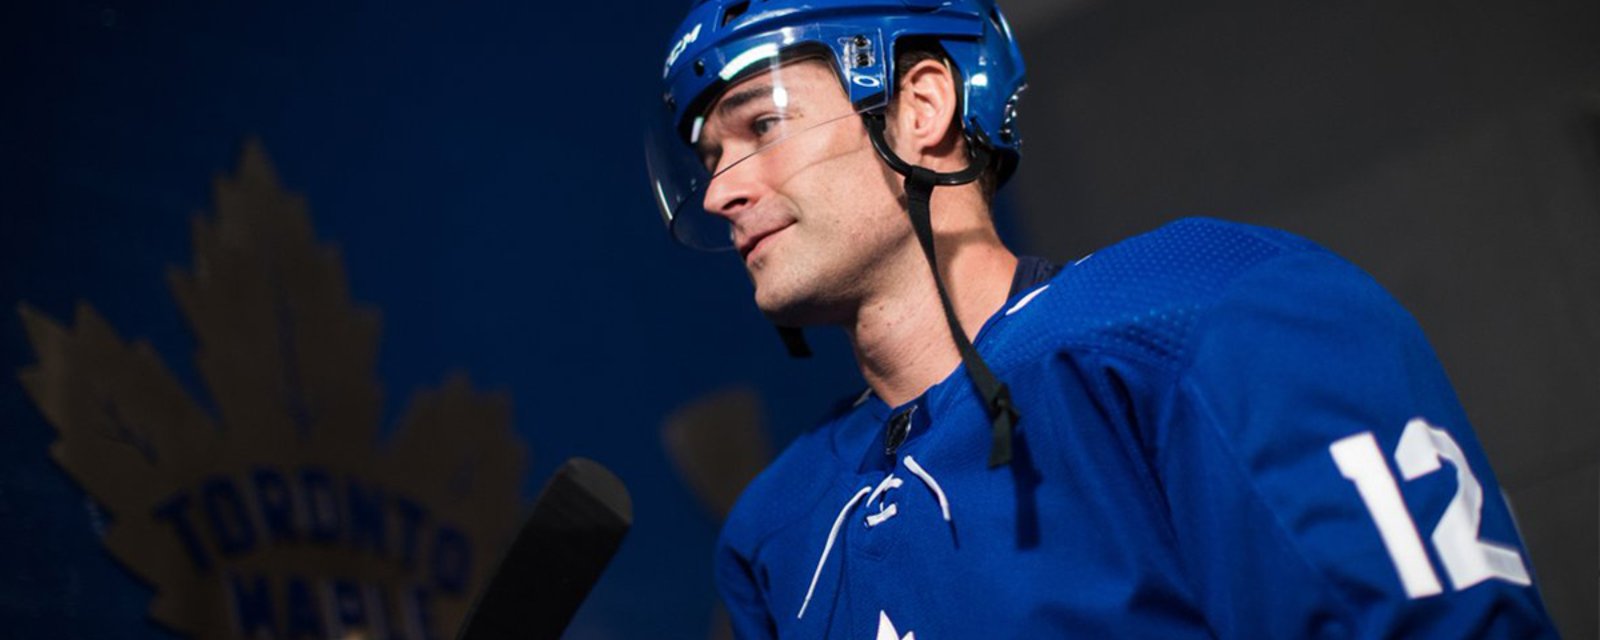 Your Call: What will the reception be for Marleau tonight in San Jose?